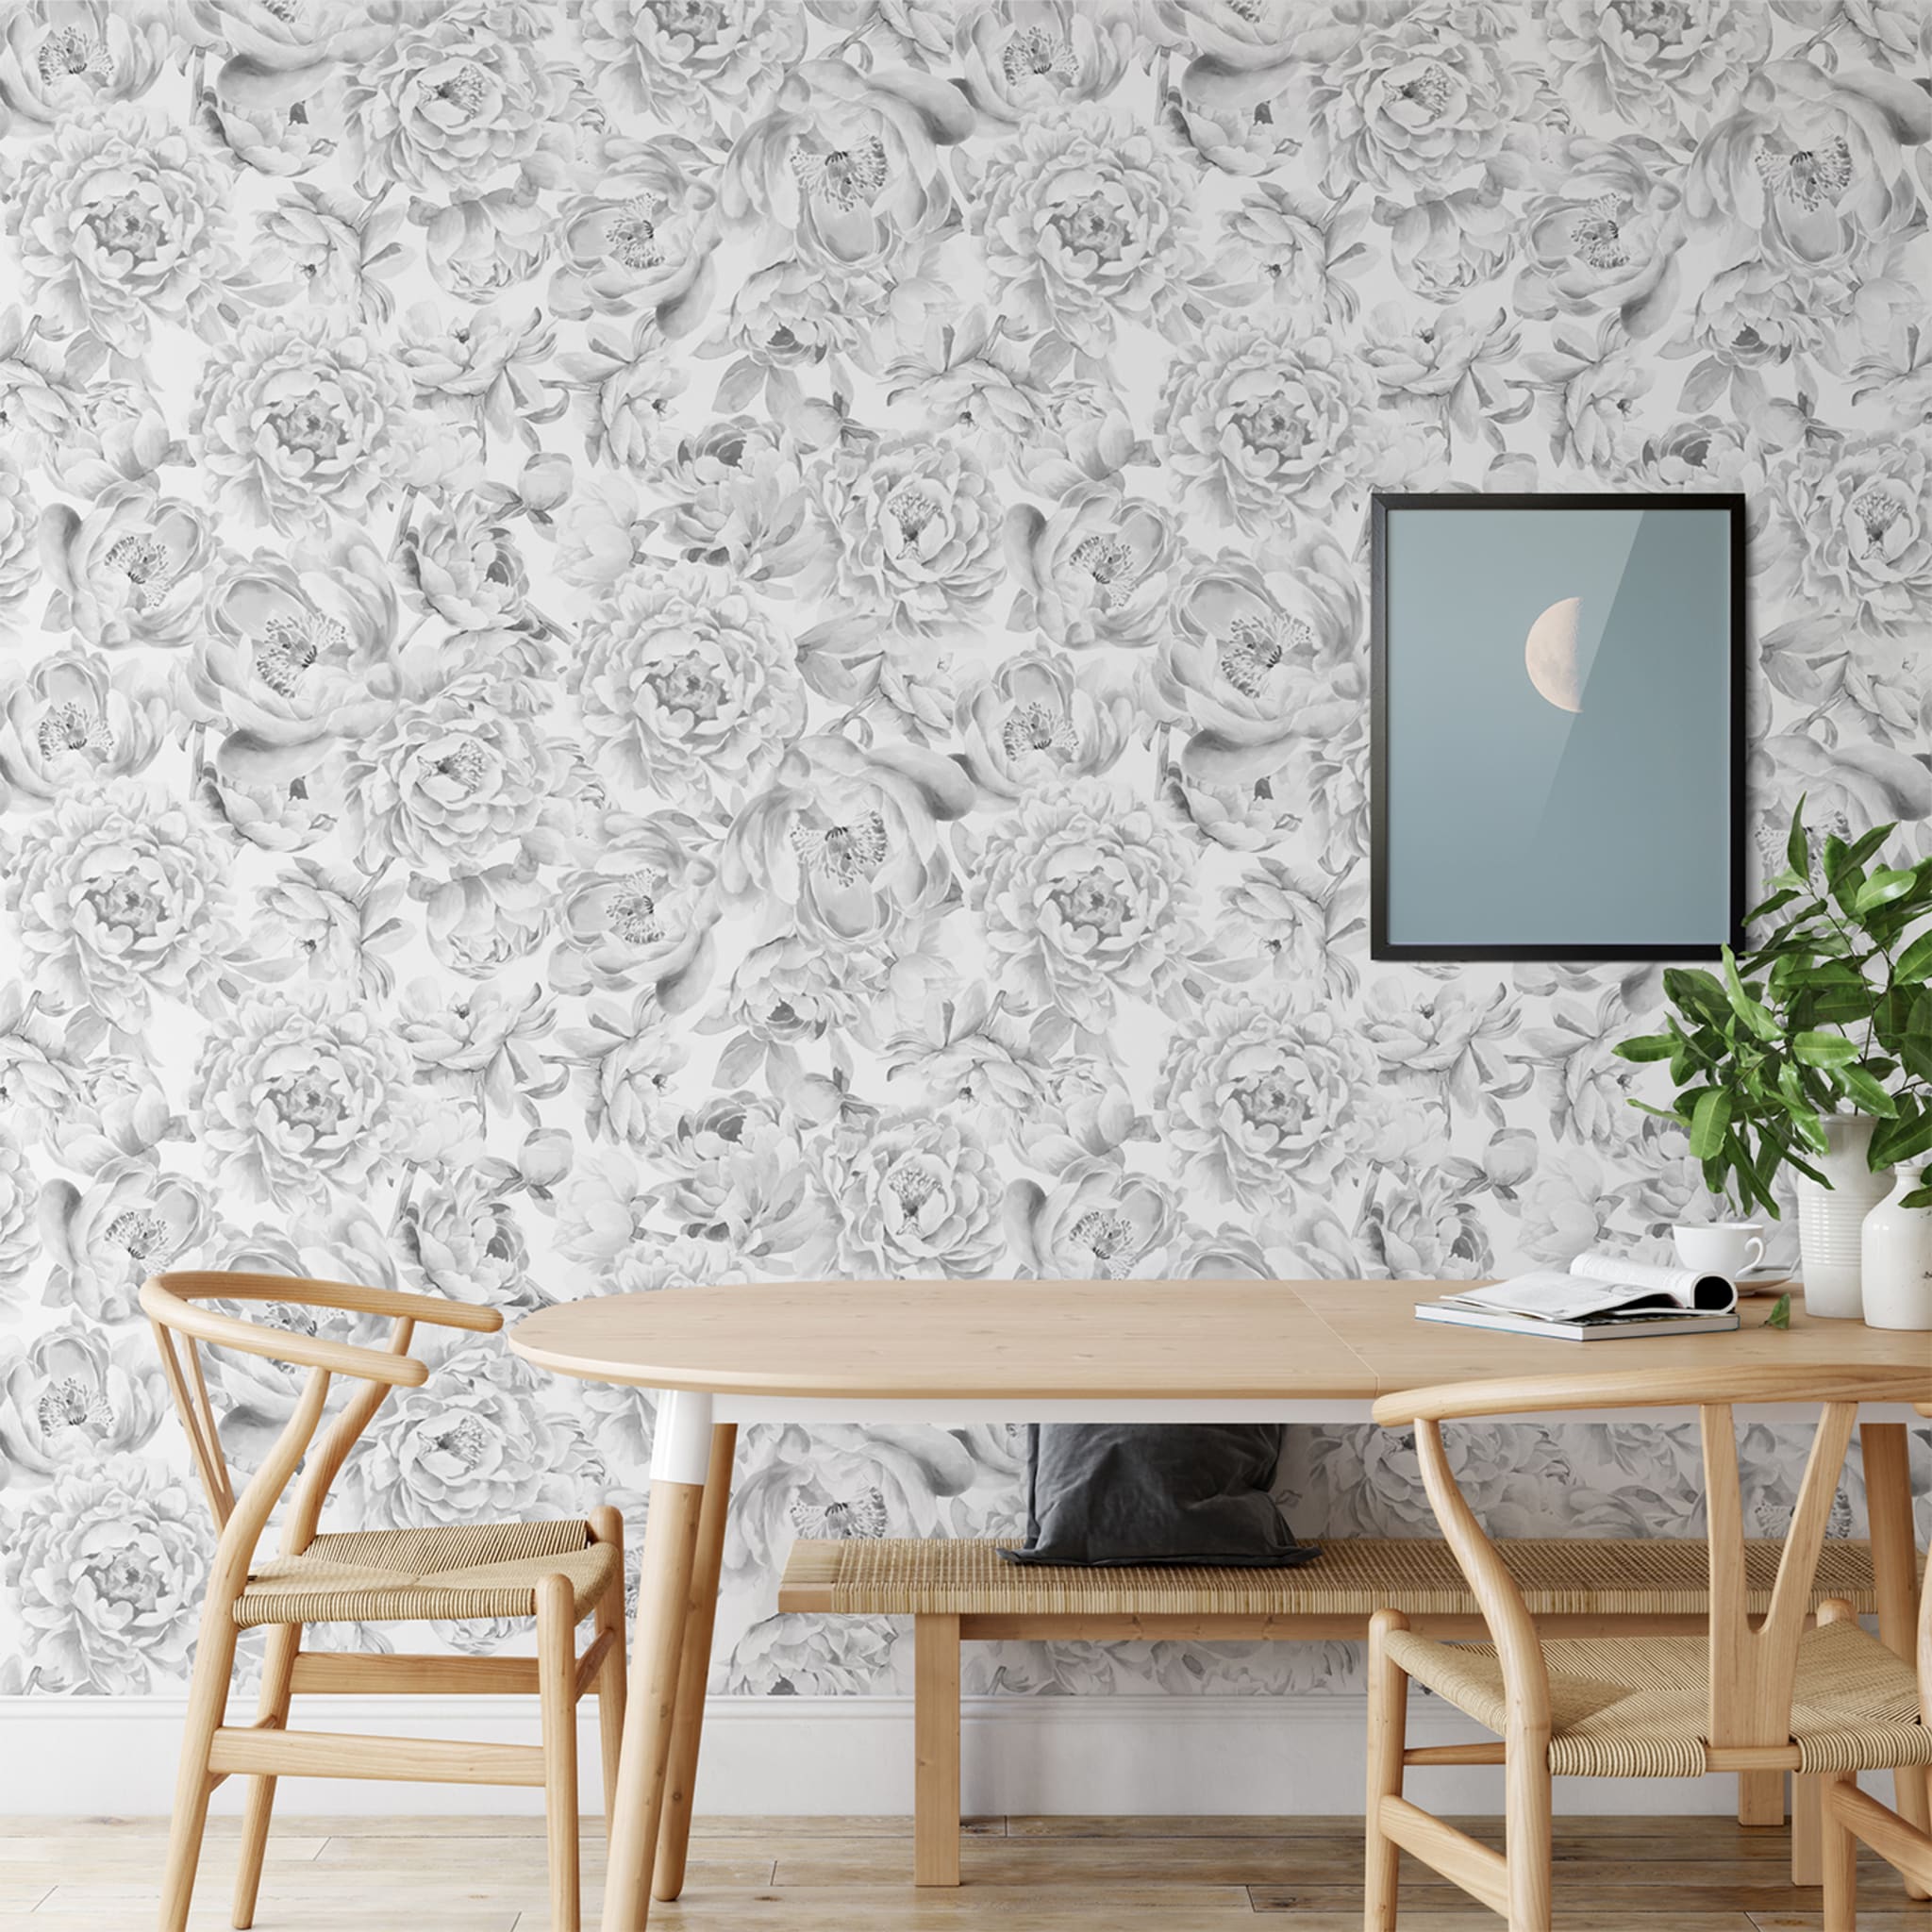 Black and White Monochromatic Floral Peony Wallpaper - Alternative view 5